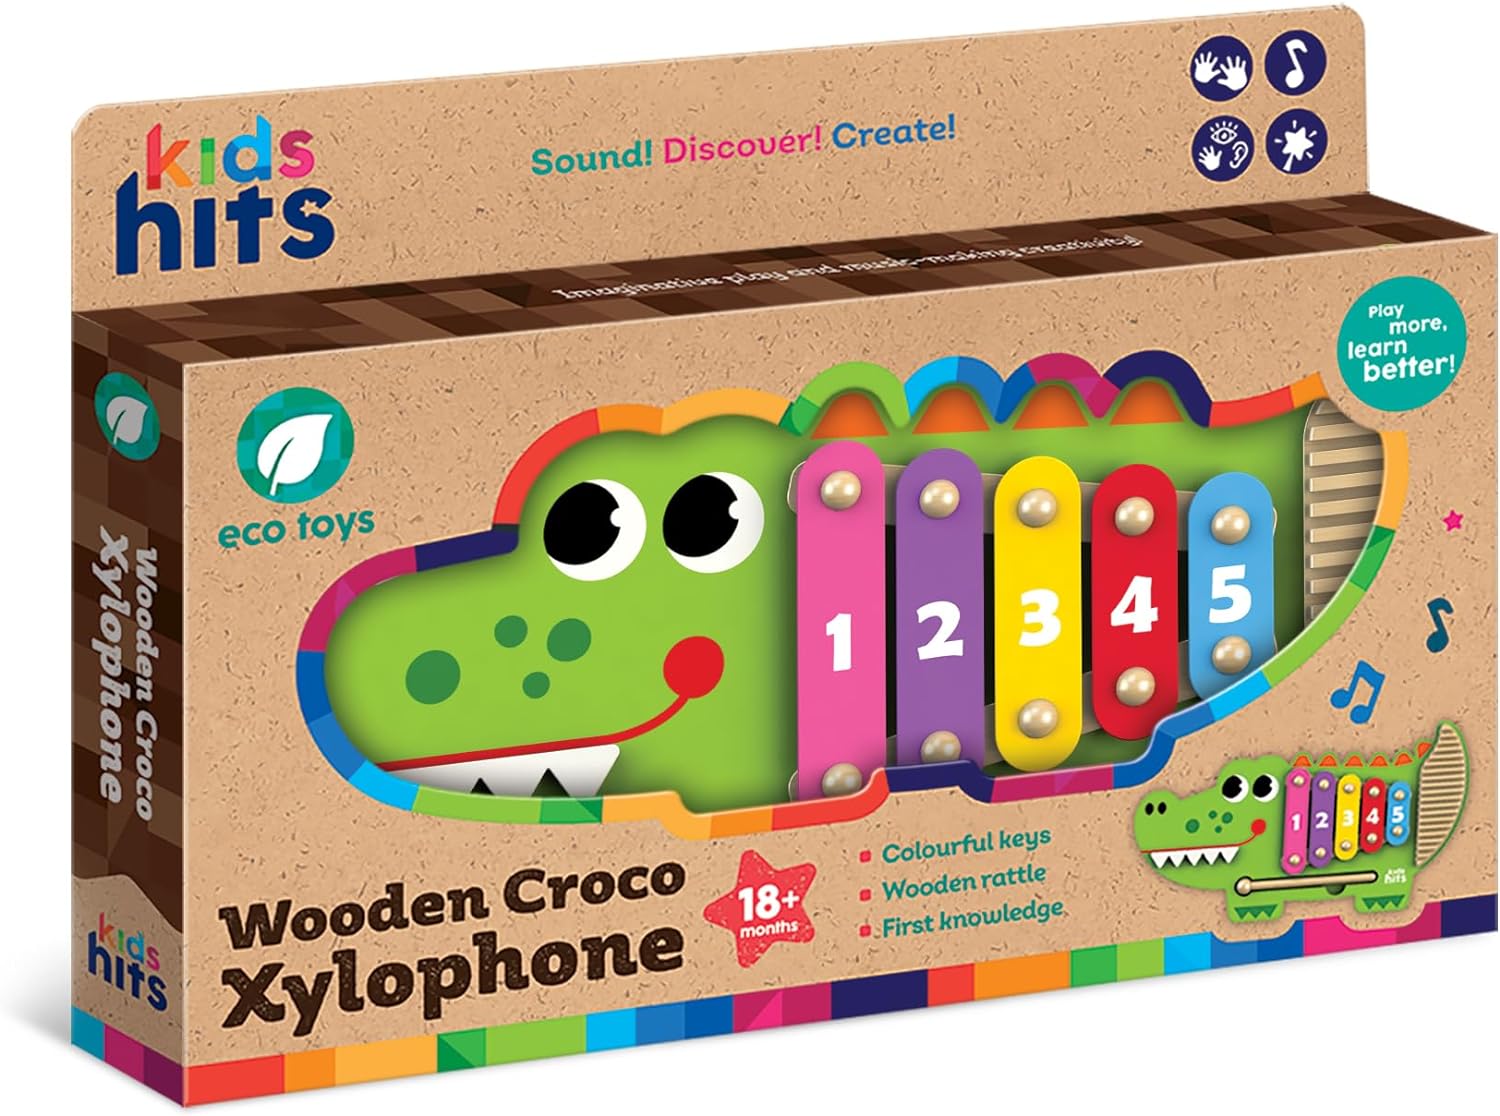 Kids Hits Harmonize Playtime with The Wooden Croco Xylophone Adventure